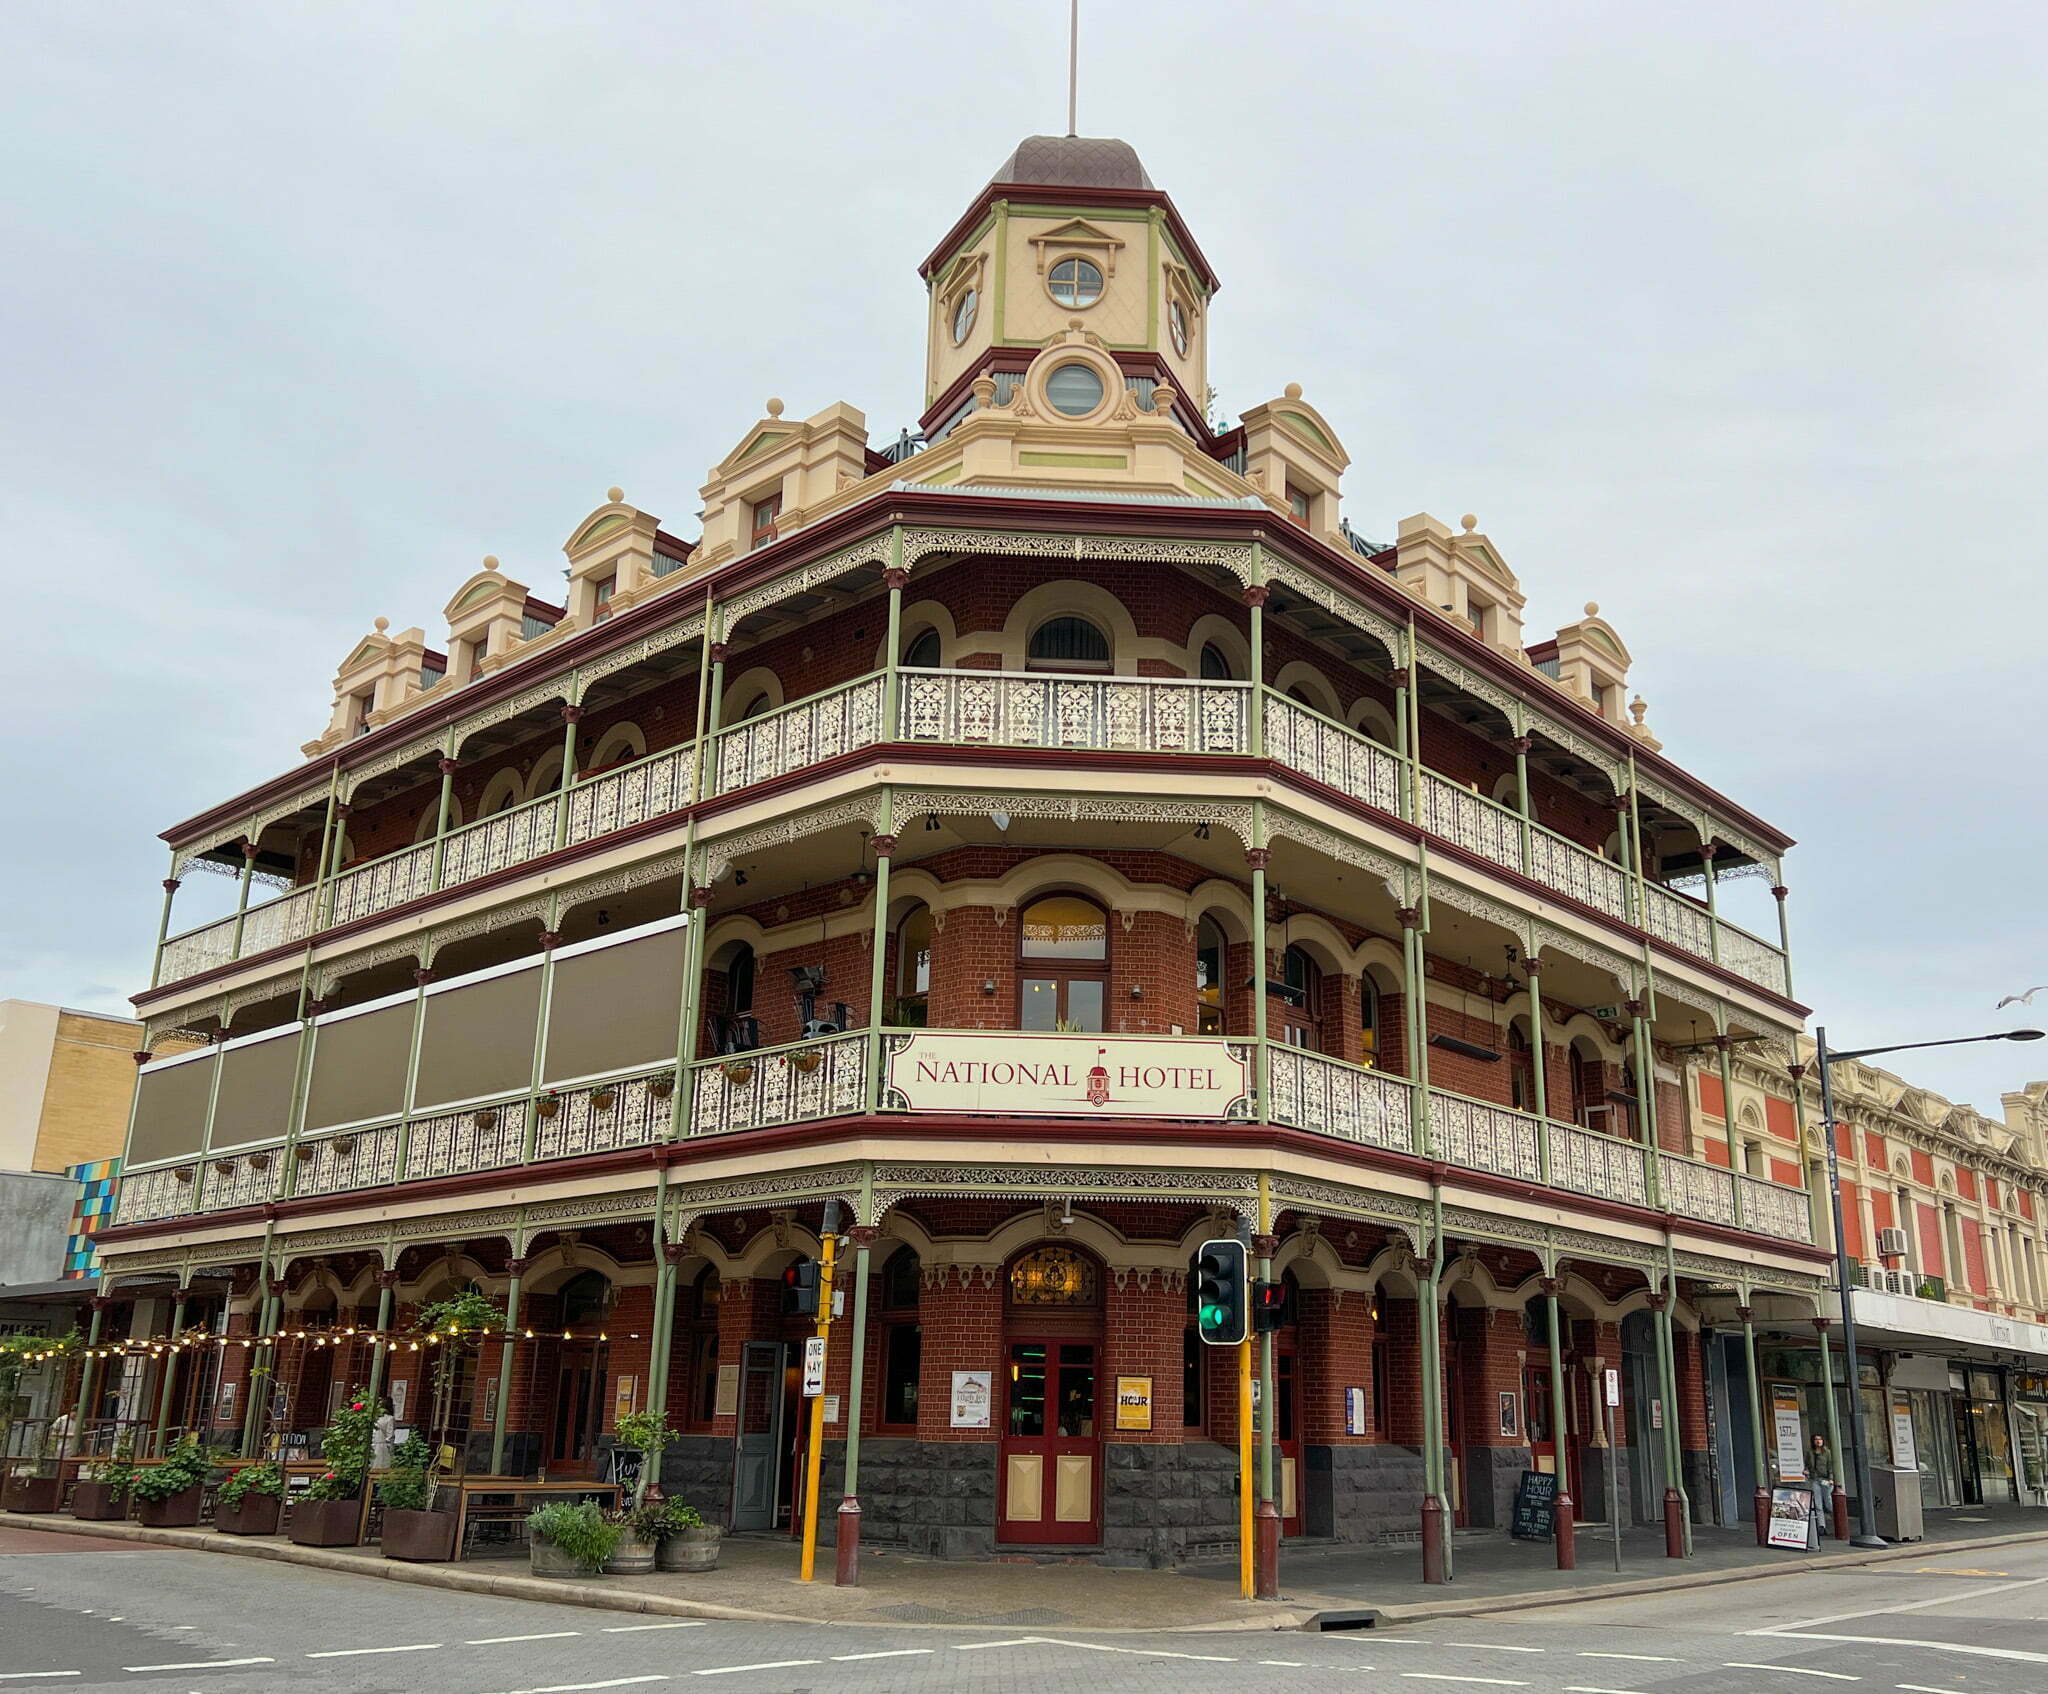 The beautiful heritage exterior of the National Hotel, Fremantle